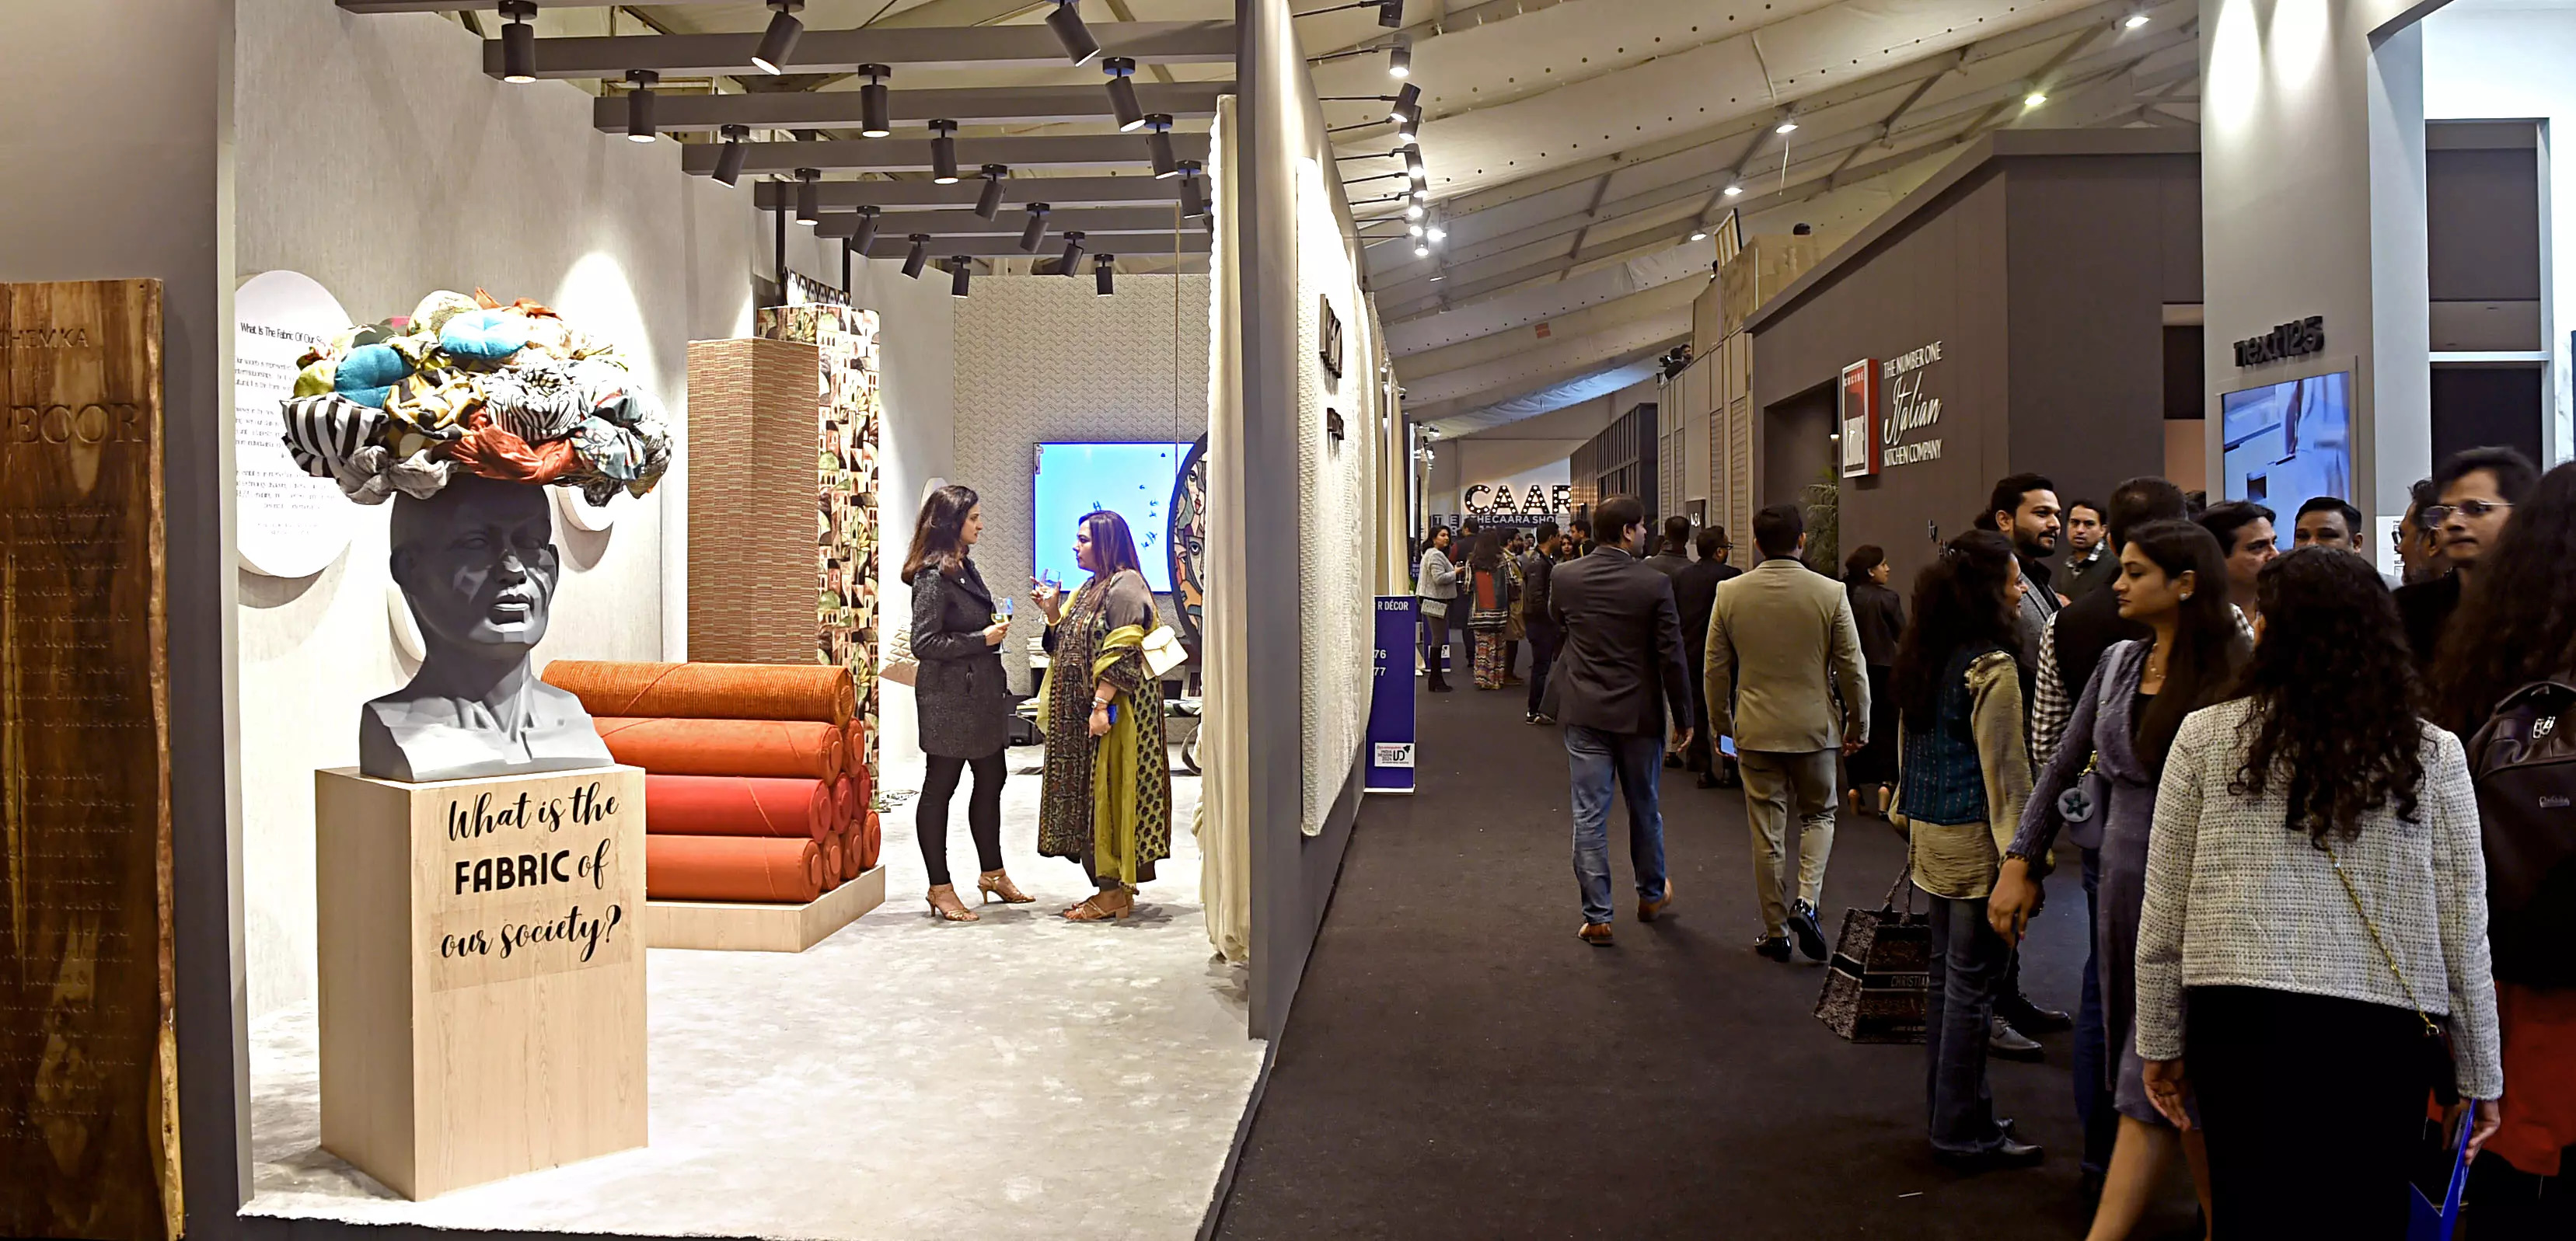 Guests at India Design ID exhibition